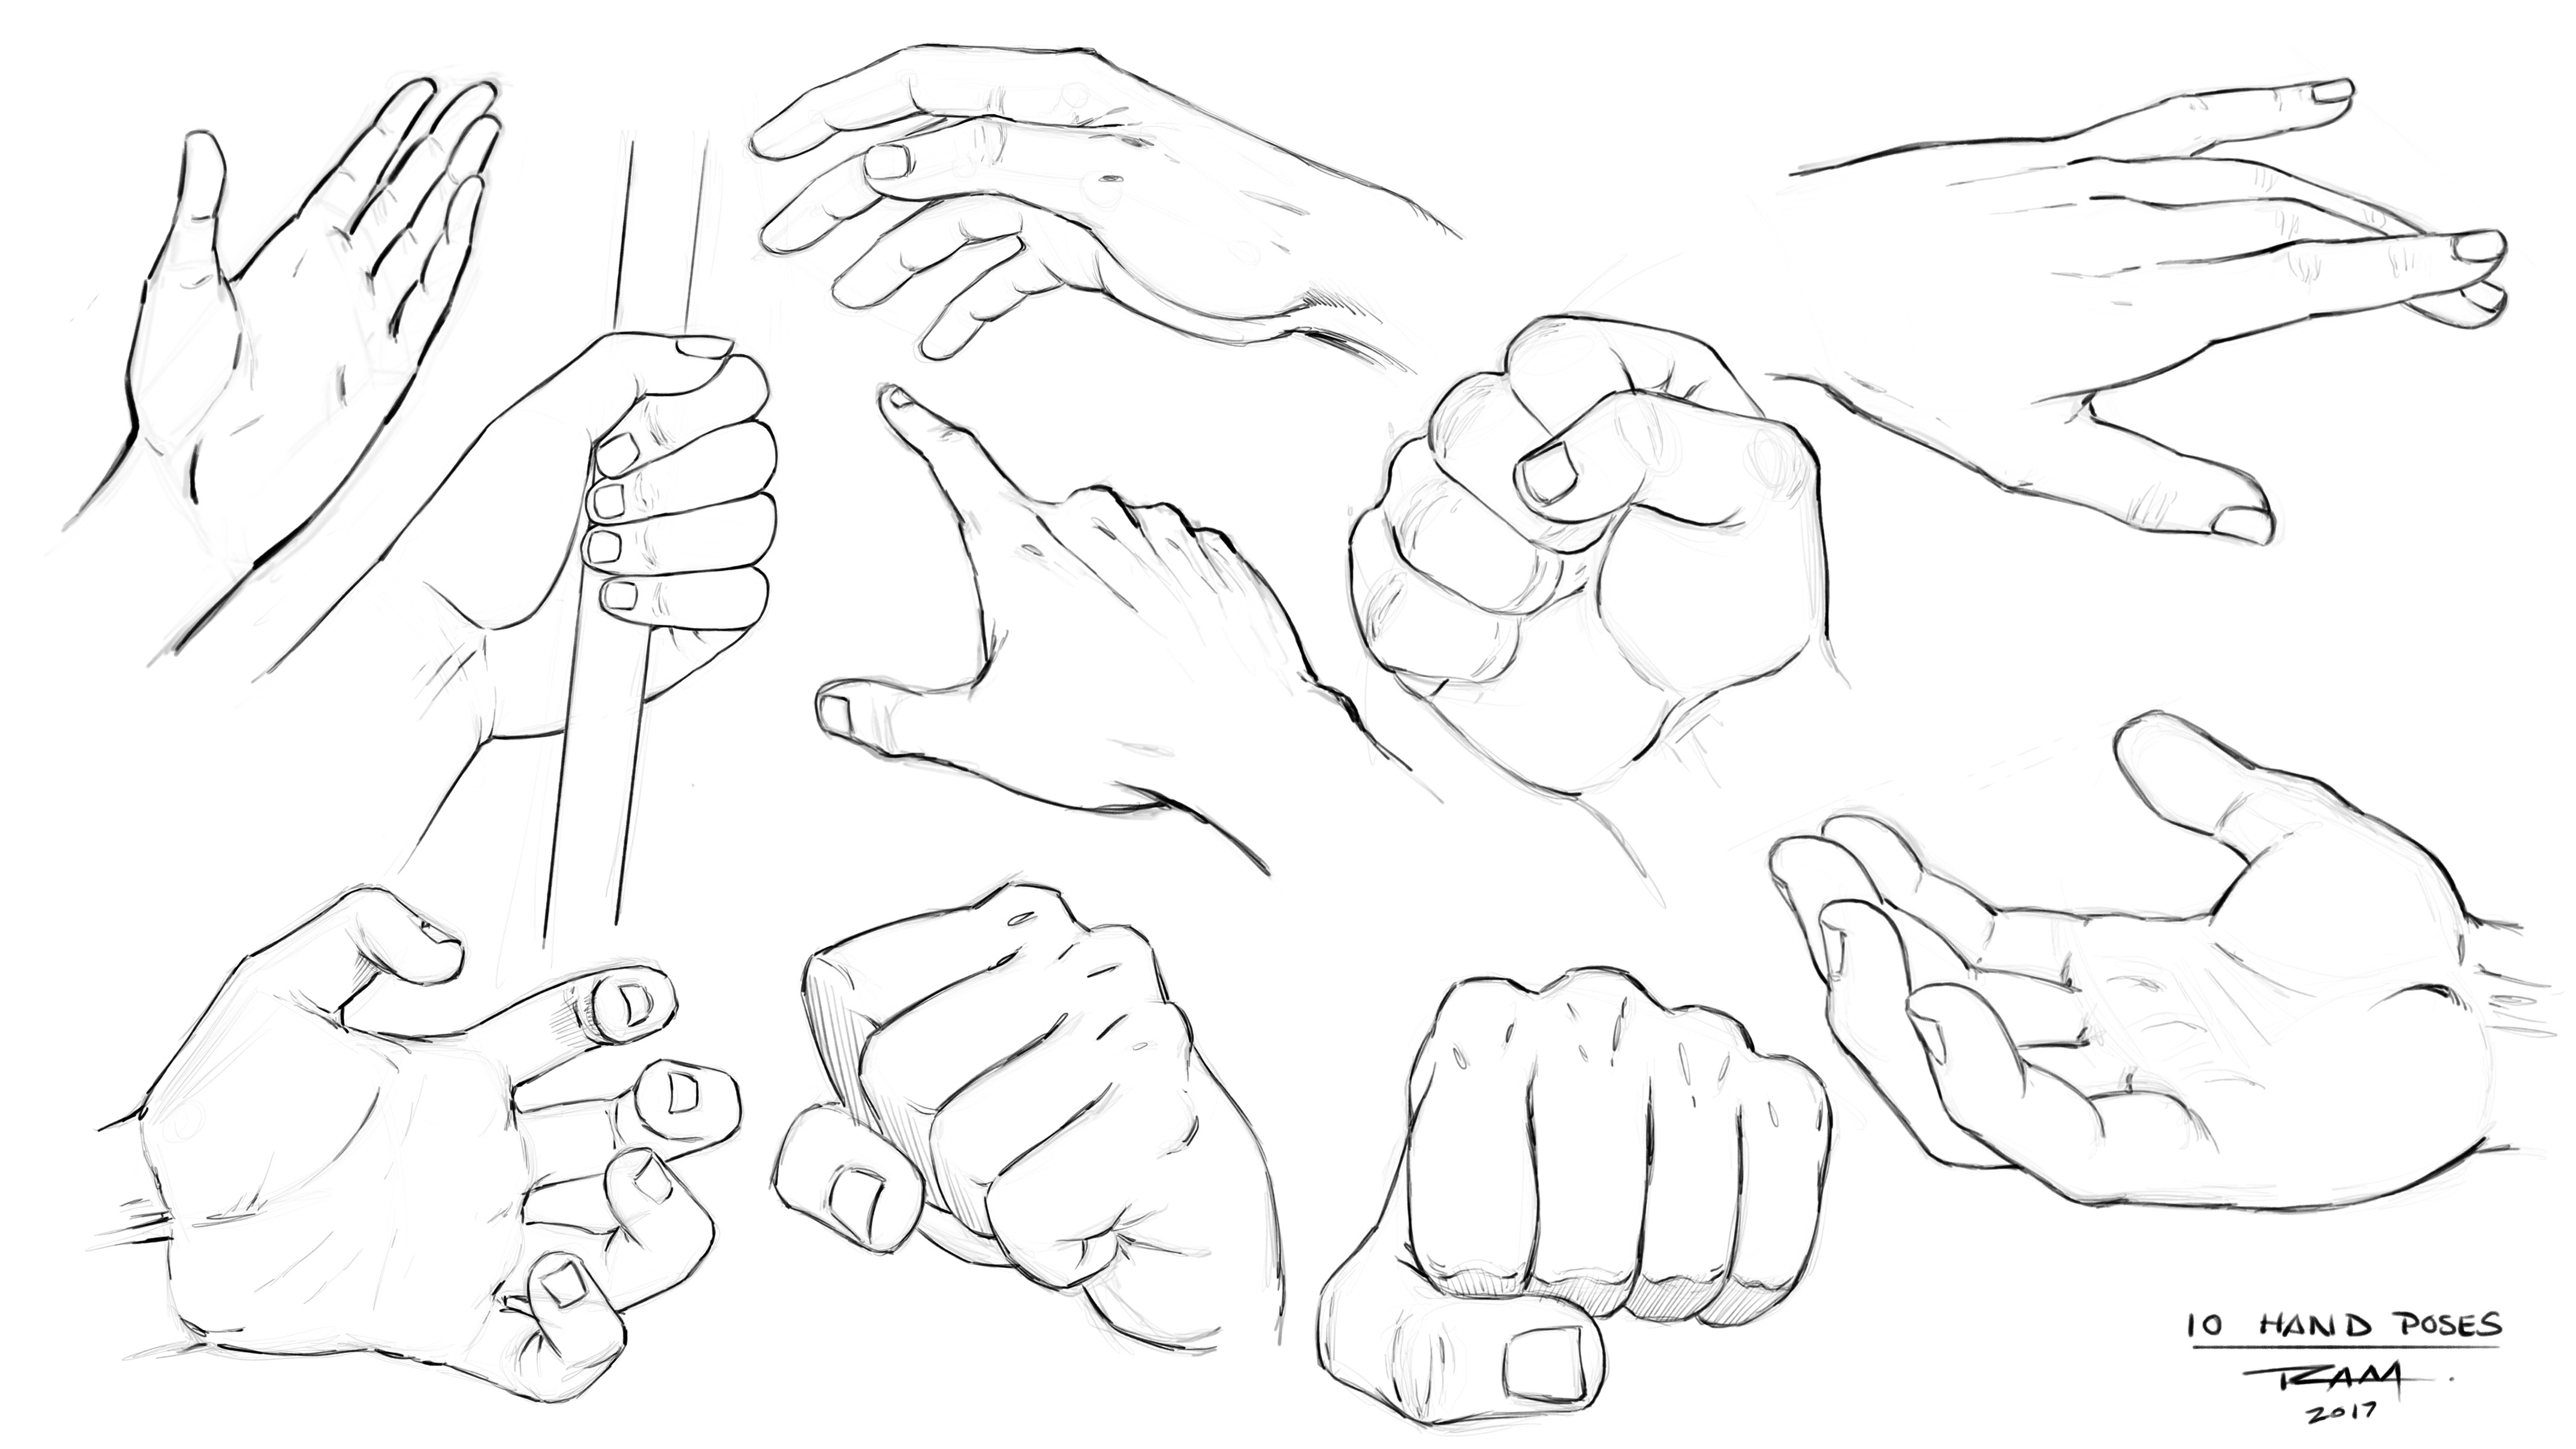 Amazon.com: How to draw hands and hand poses : Movies & TV